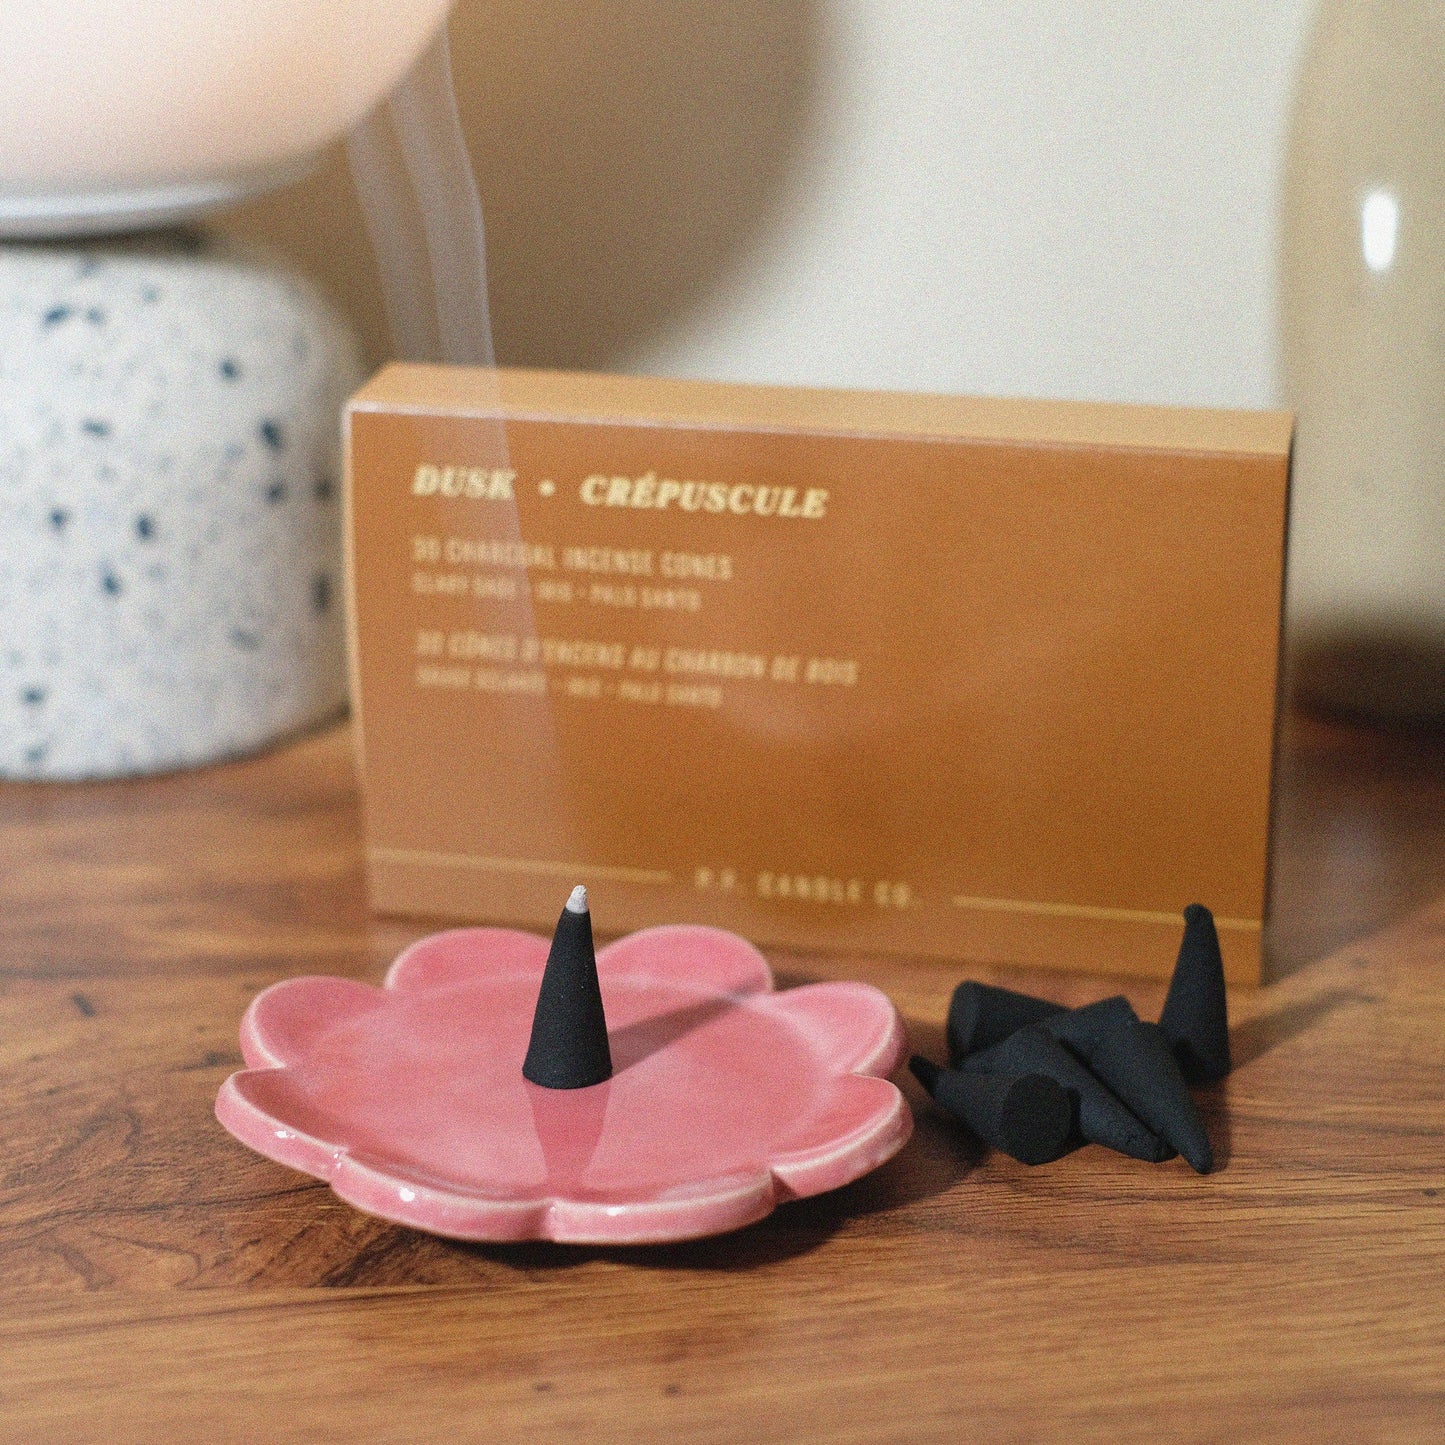 Dusk – Sunset Incense Cones by P.F. Candle Co. - Sleepy Mountain